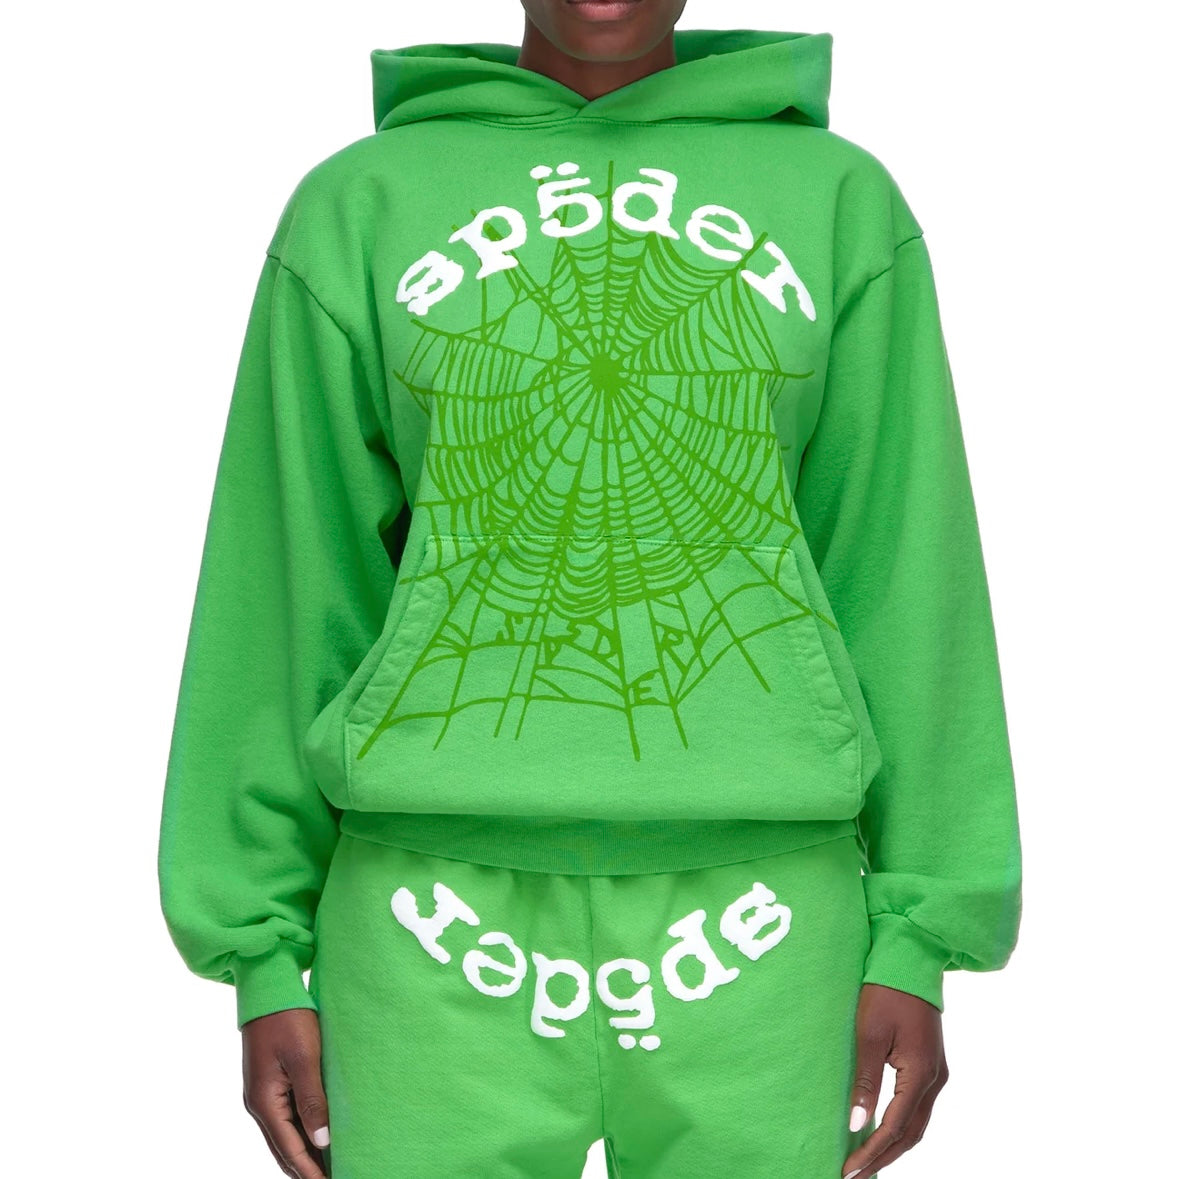 Sp5der Green White Legacy Hoodie On Body Front Female